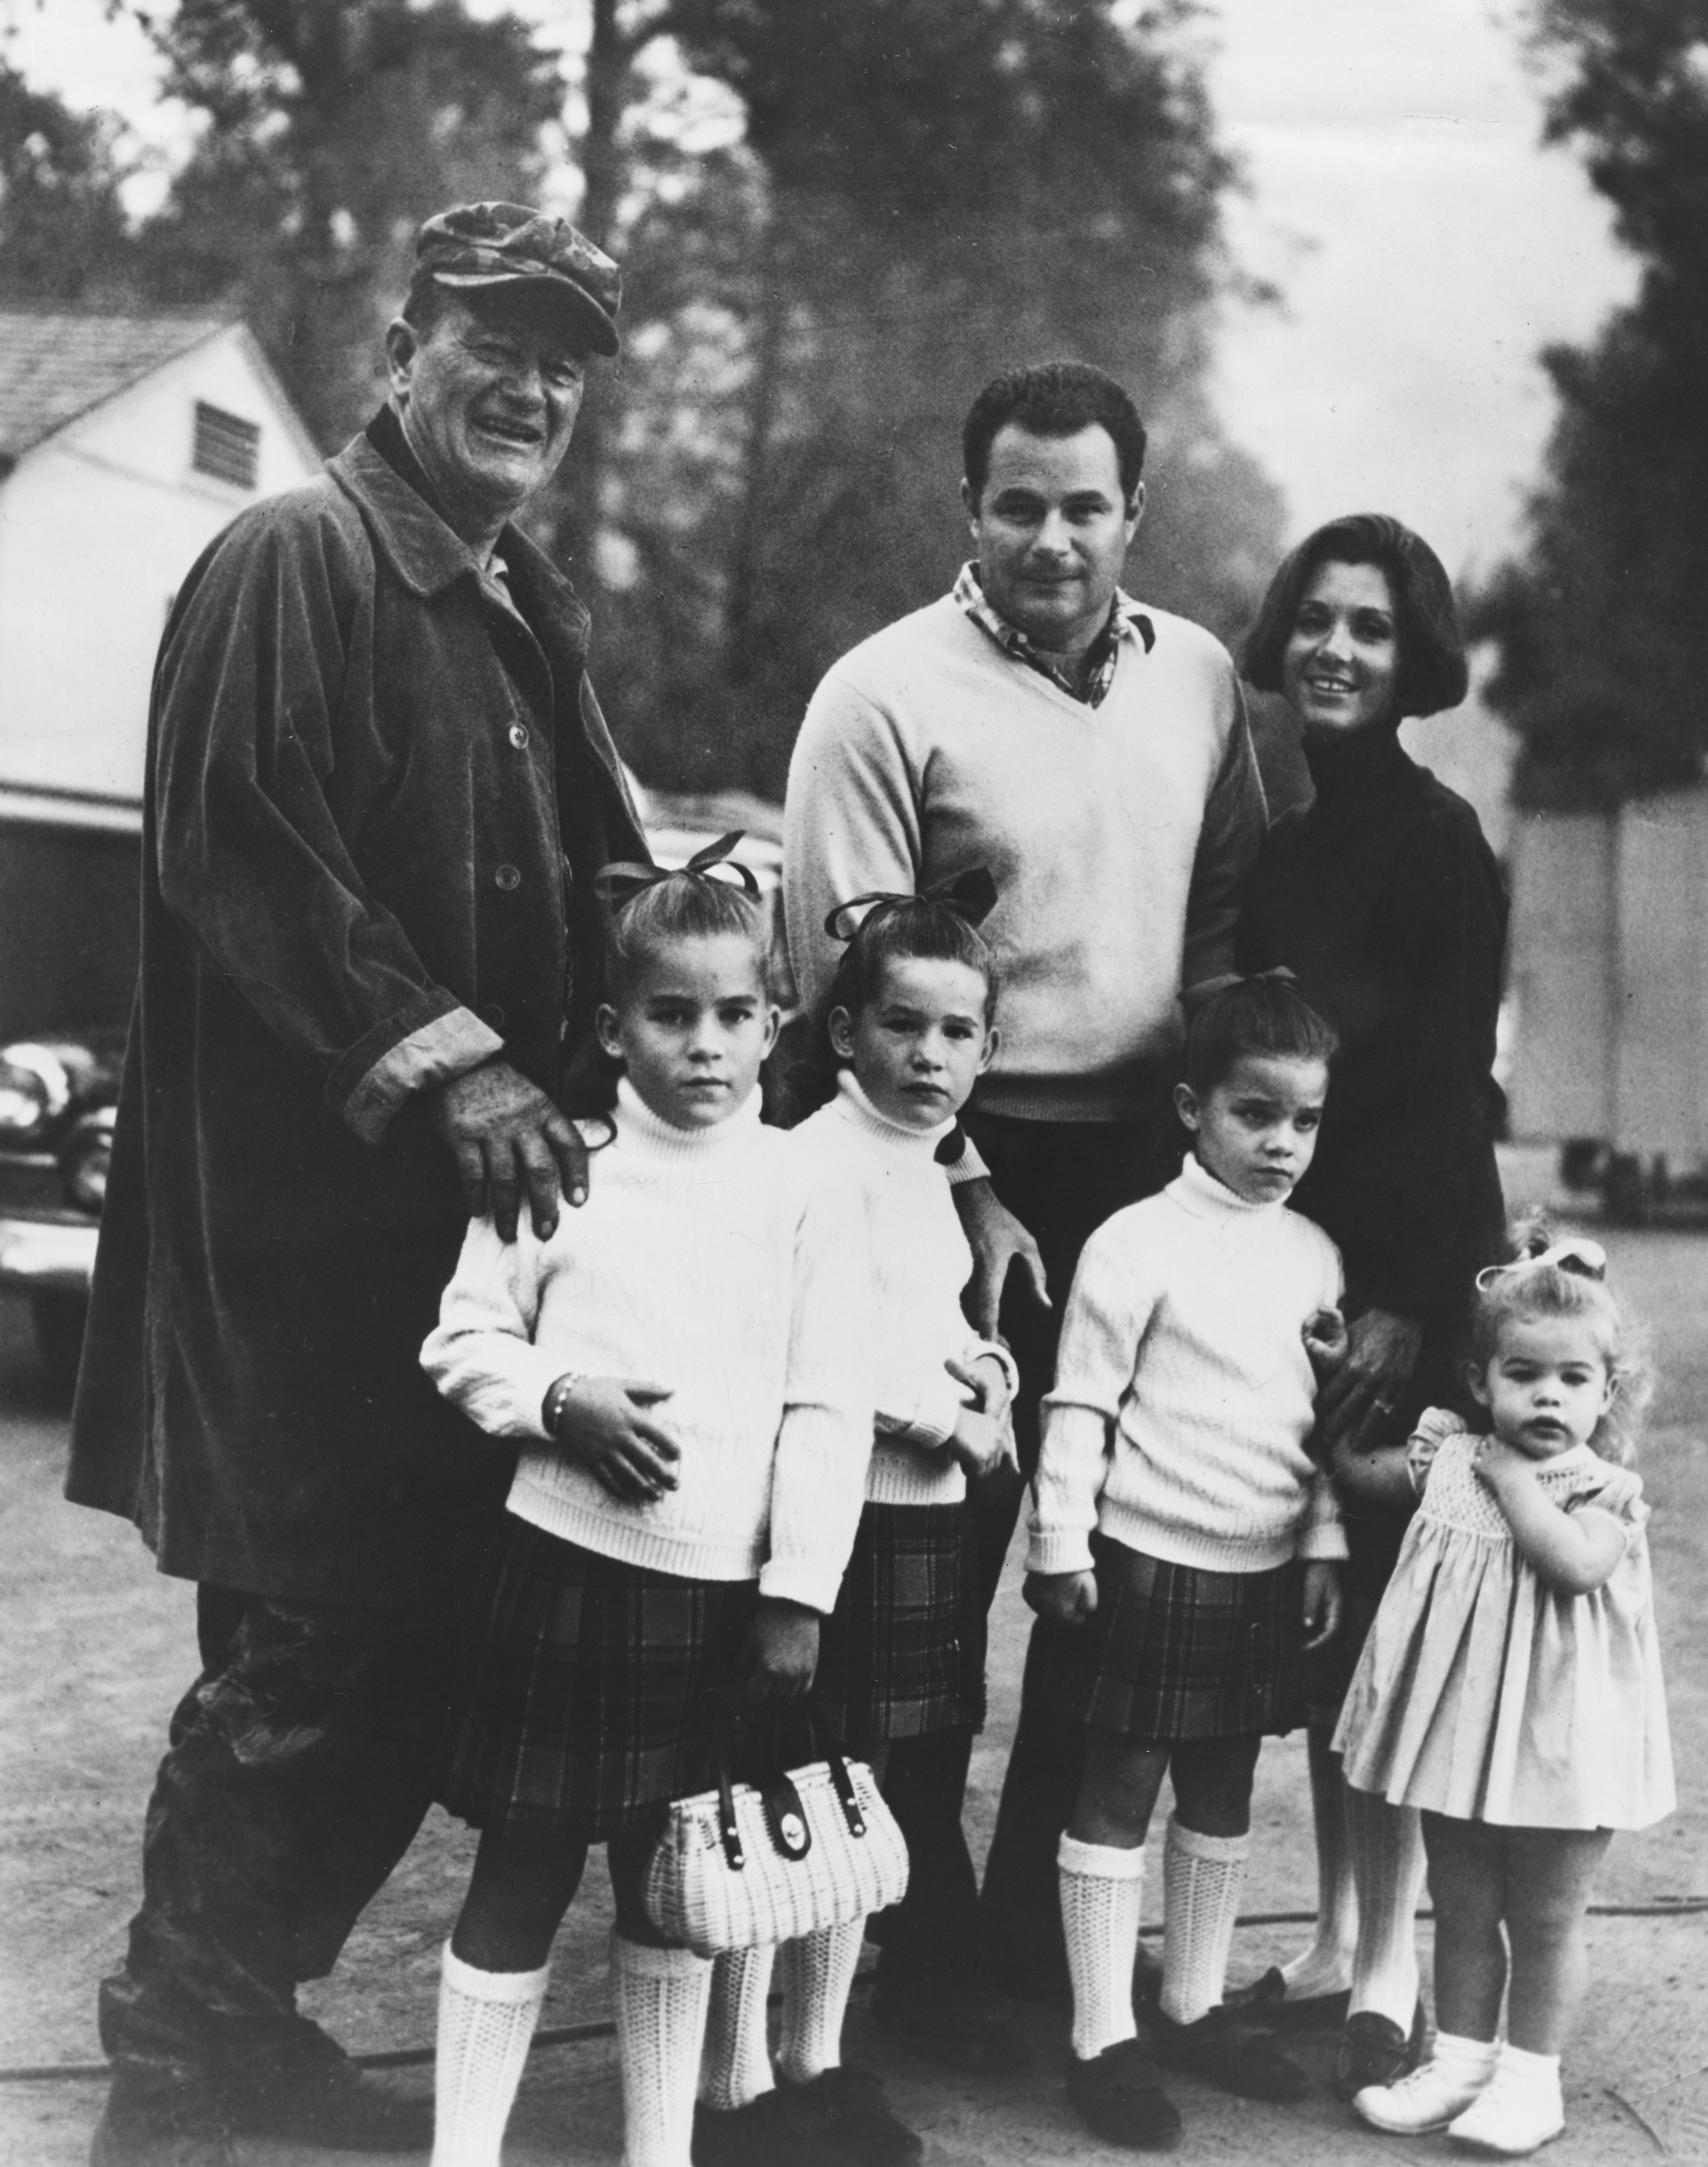 Portrait of actor John Wayne, with his son Michael, daughter-in-law Gretchen, and granddaughters Alicia, Maria, Teresa and Josephine, March 19th 1968 | Source: Getty Images